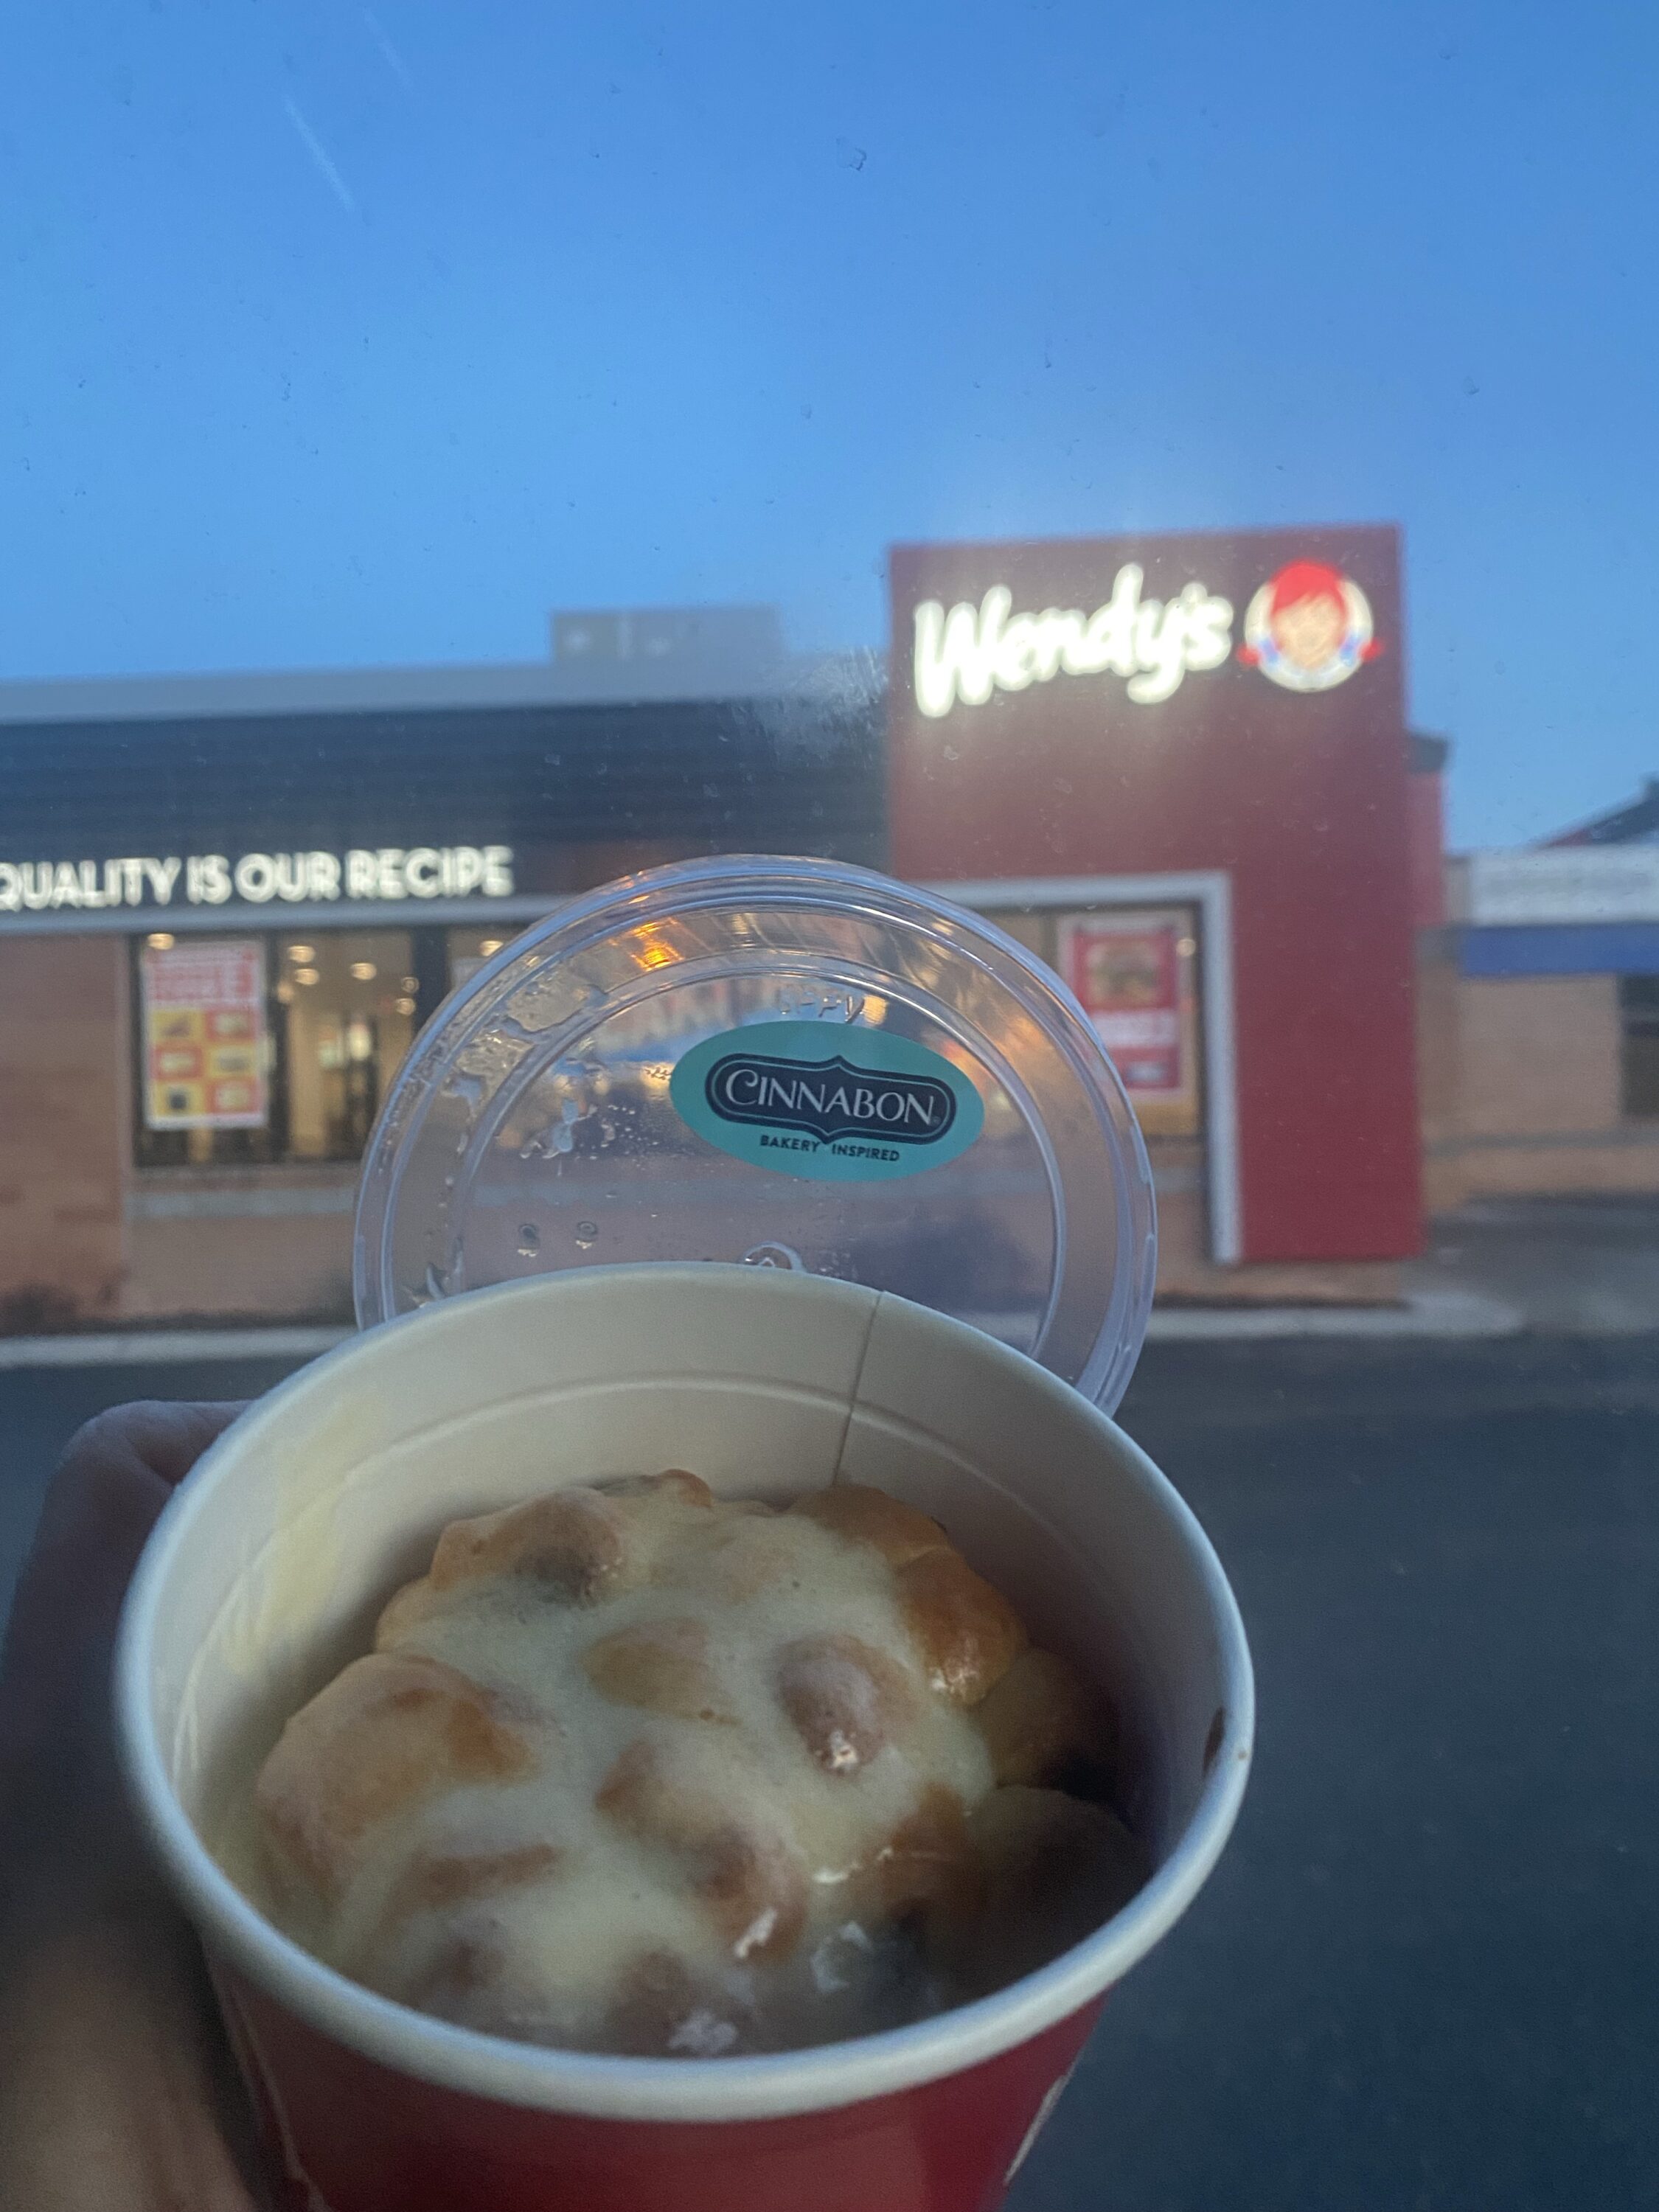 Cinnabon at Wendy's: Enjoy a free Cinnabon Pull-Apart at Wendy's until 10:30 am local time on Feb. 29. Must use mobile app. 